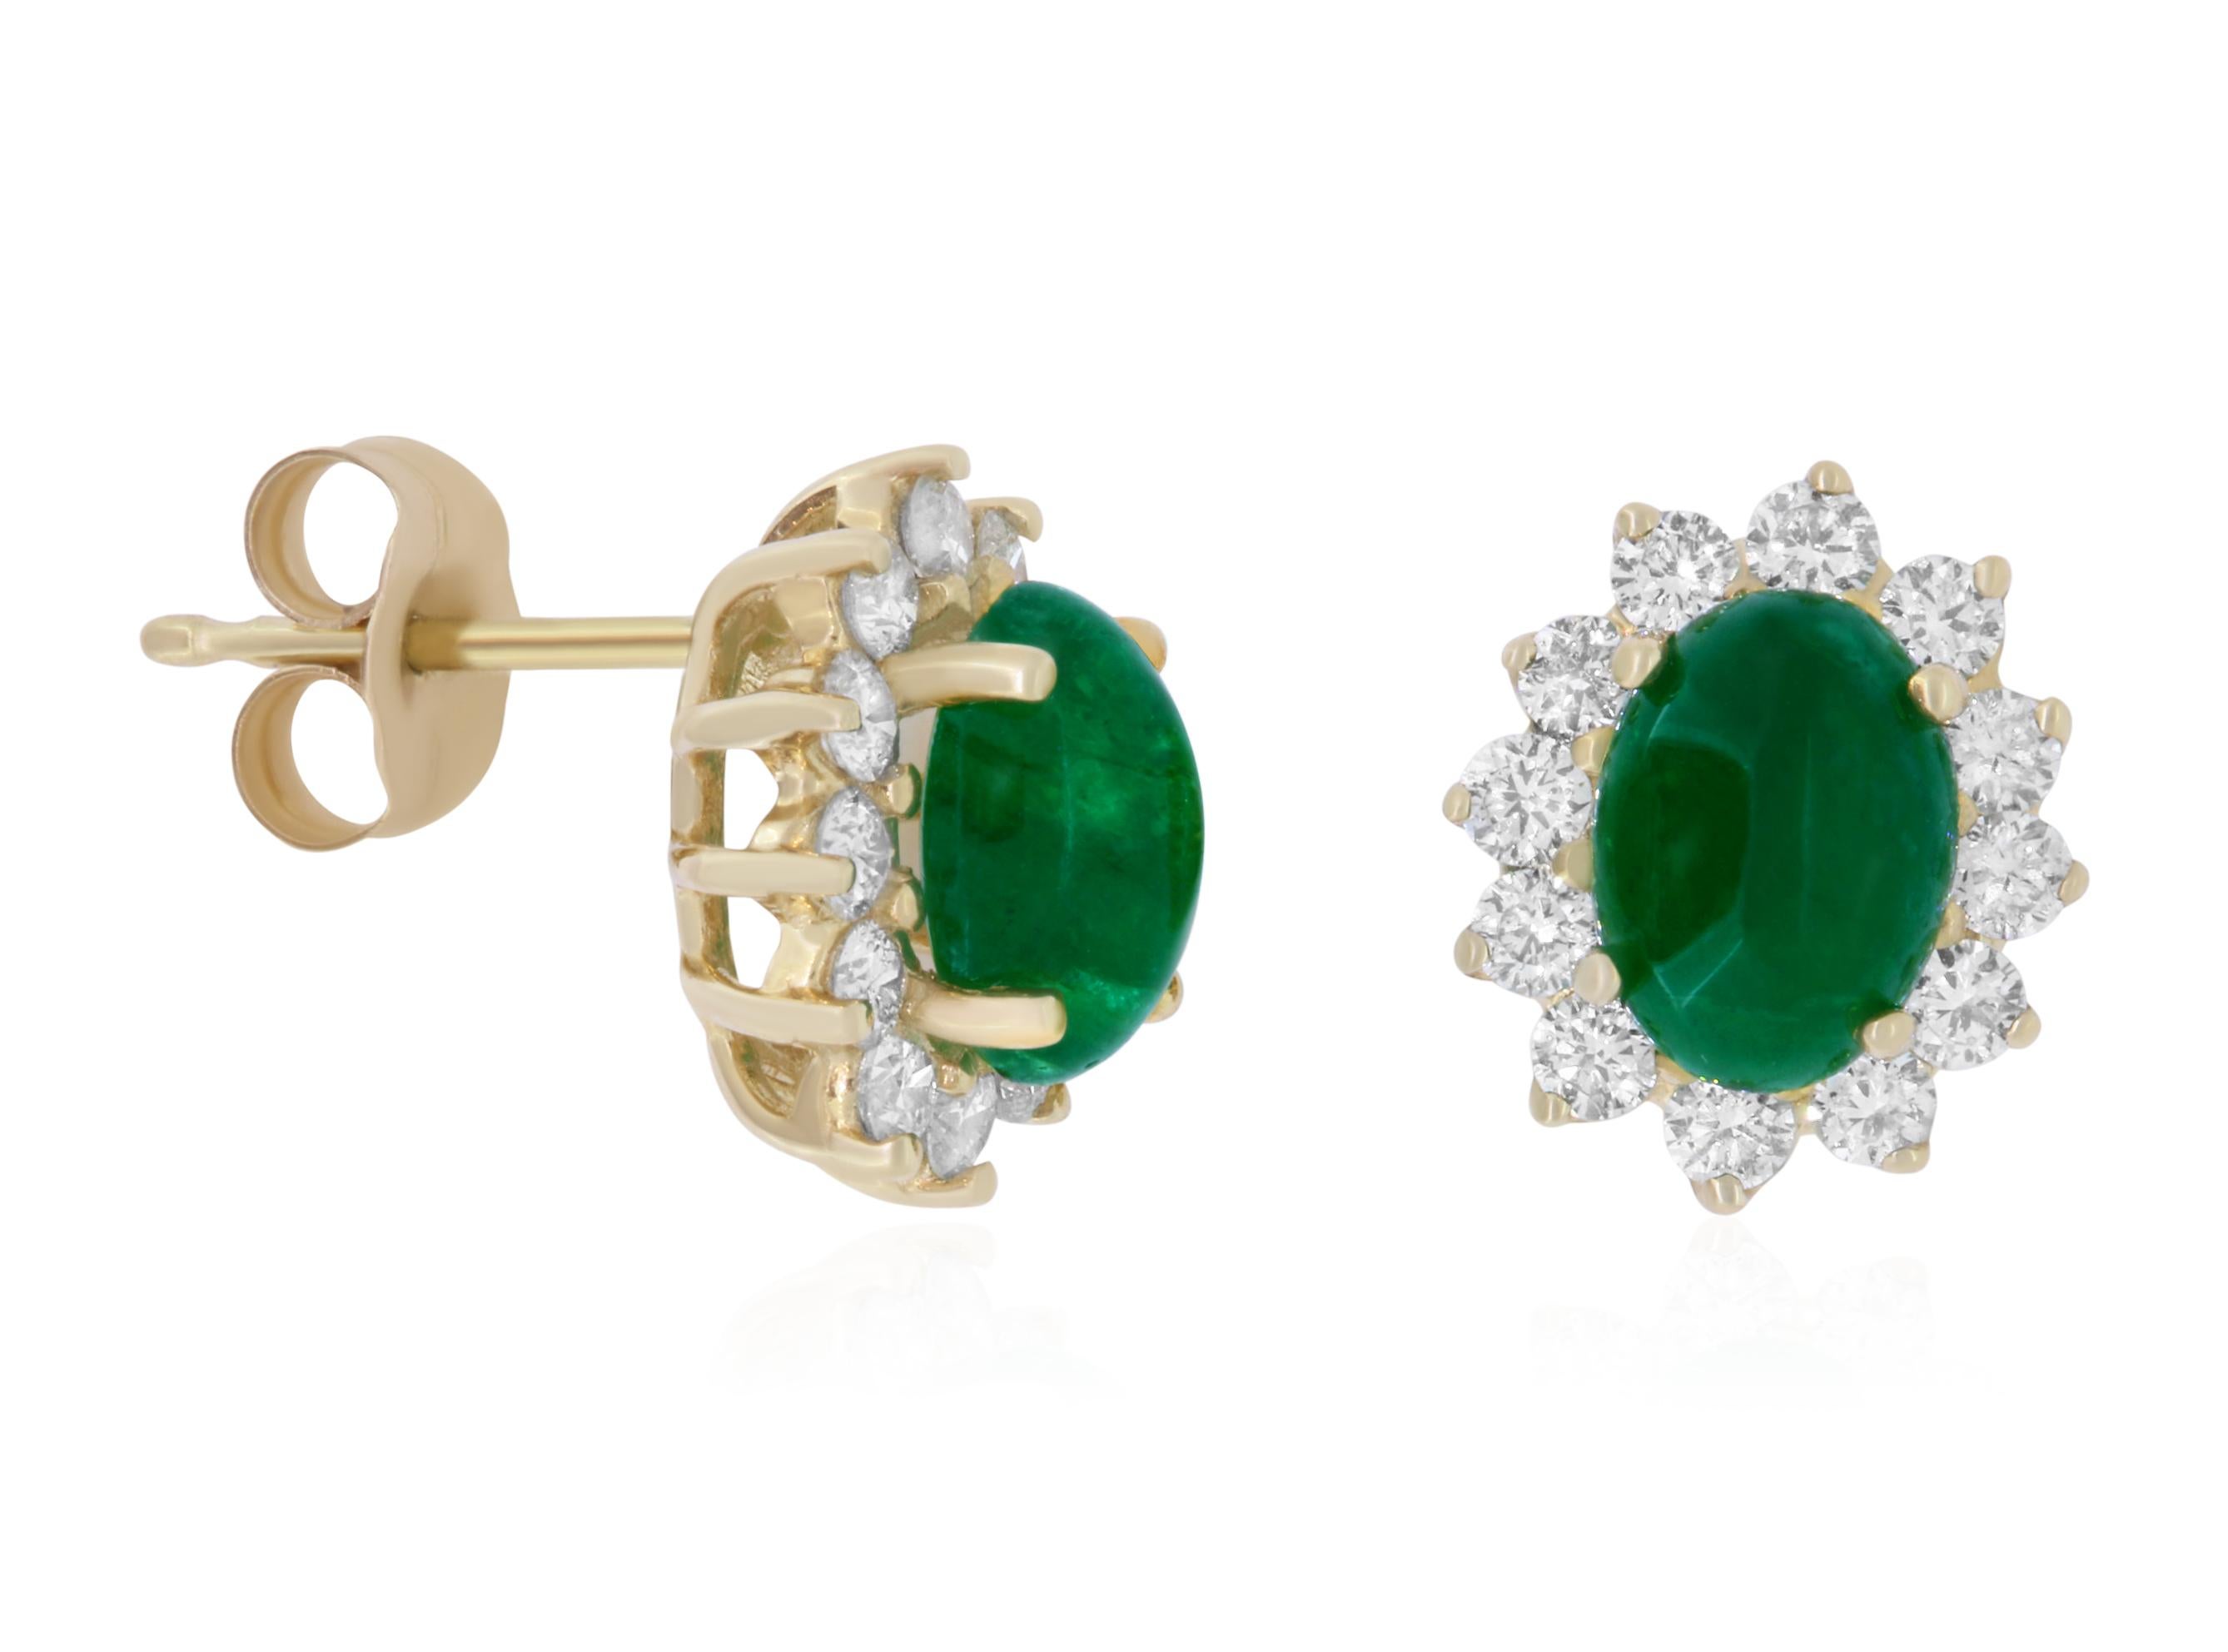 Material: 14k Yellow Gold 
Stone Details: 2 Oval Cut Cabochon Emeralds at 1.85 Carats Total
Mounting Stone Details: 24 Round White Diamonds at 0.60 Carats. Clarity: SI / Color: H-I

Fine one-of-a-kind craftsmanship meets incredible quality in this